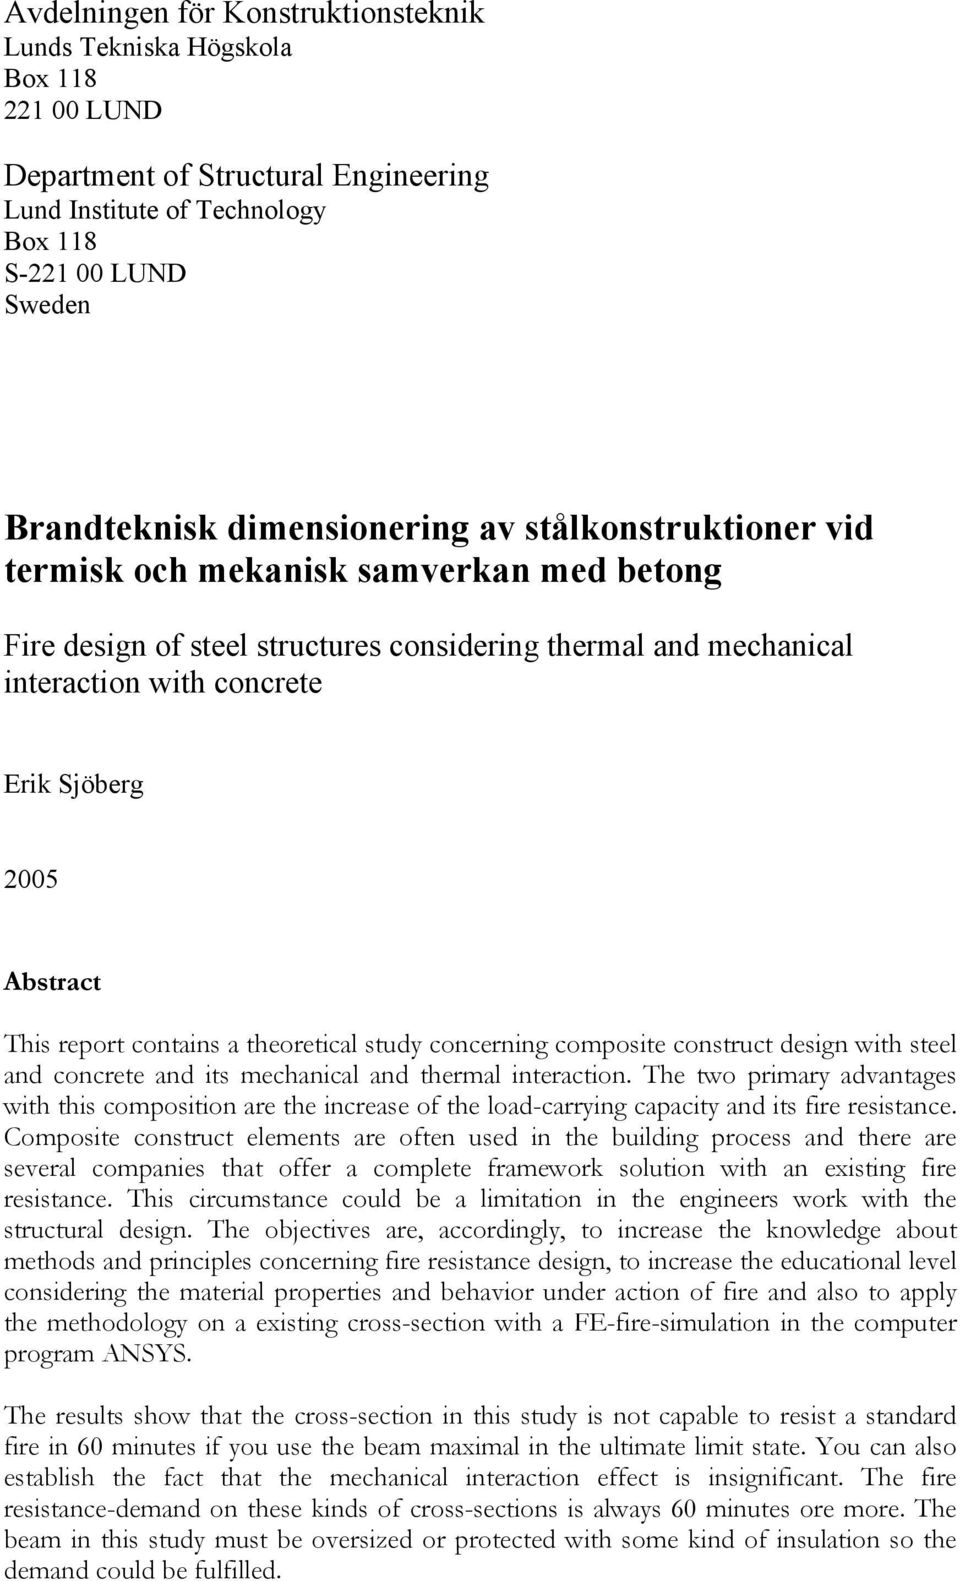 Abstract This report contains a theoretical study concerning composite construct design with steel and concrete and its mechanical and thermal interaction.